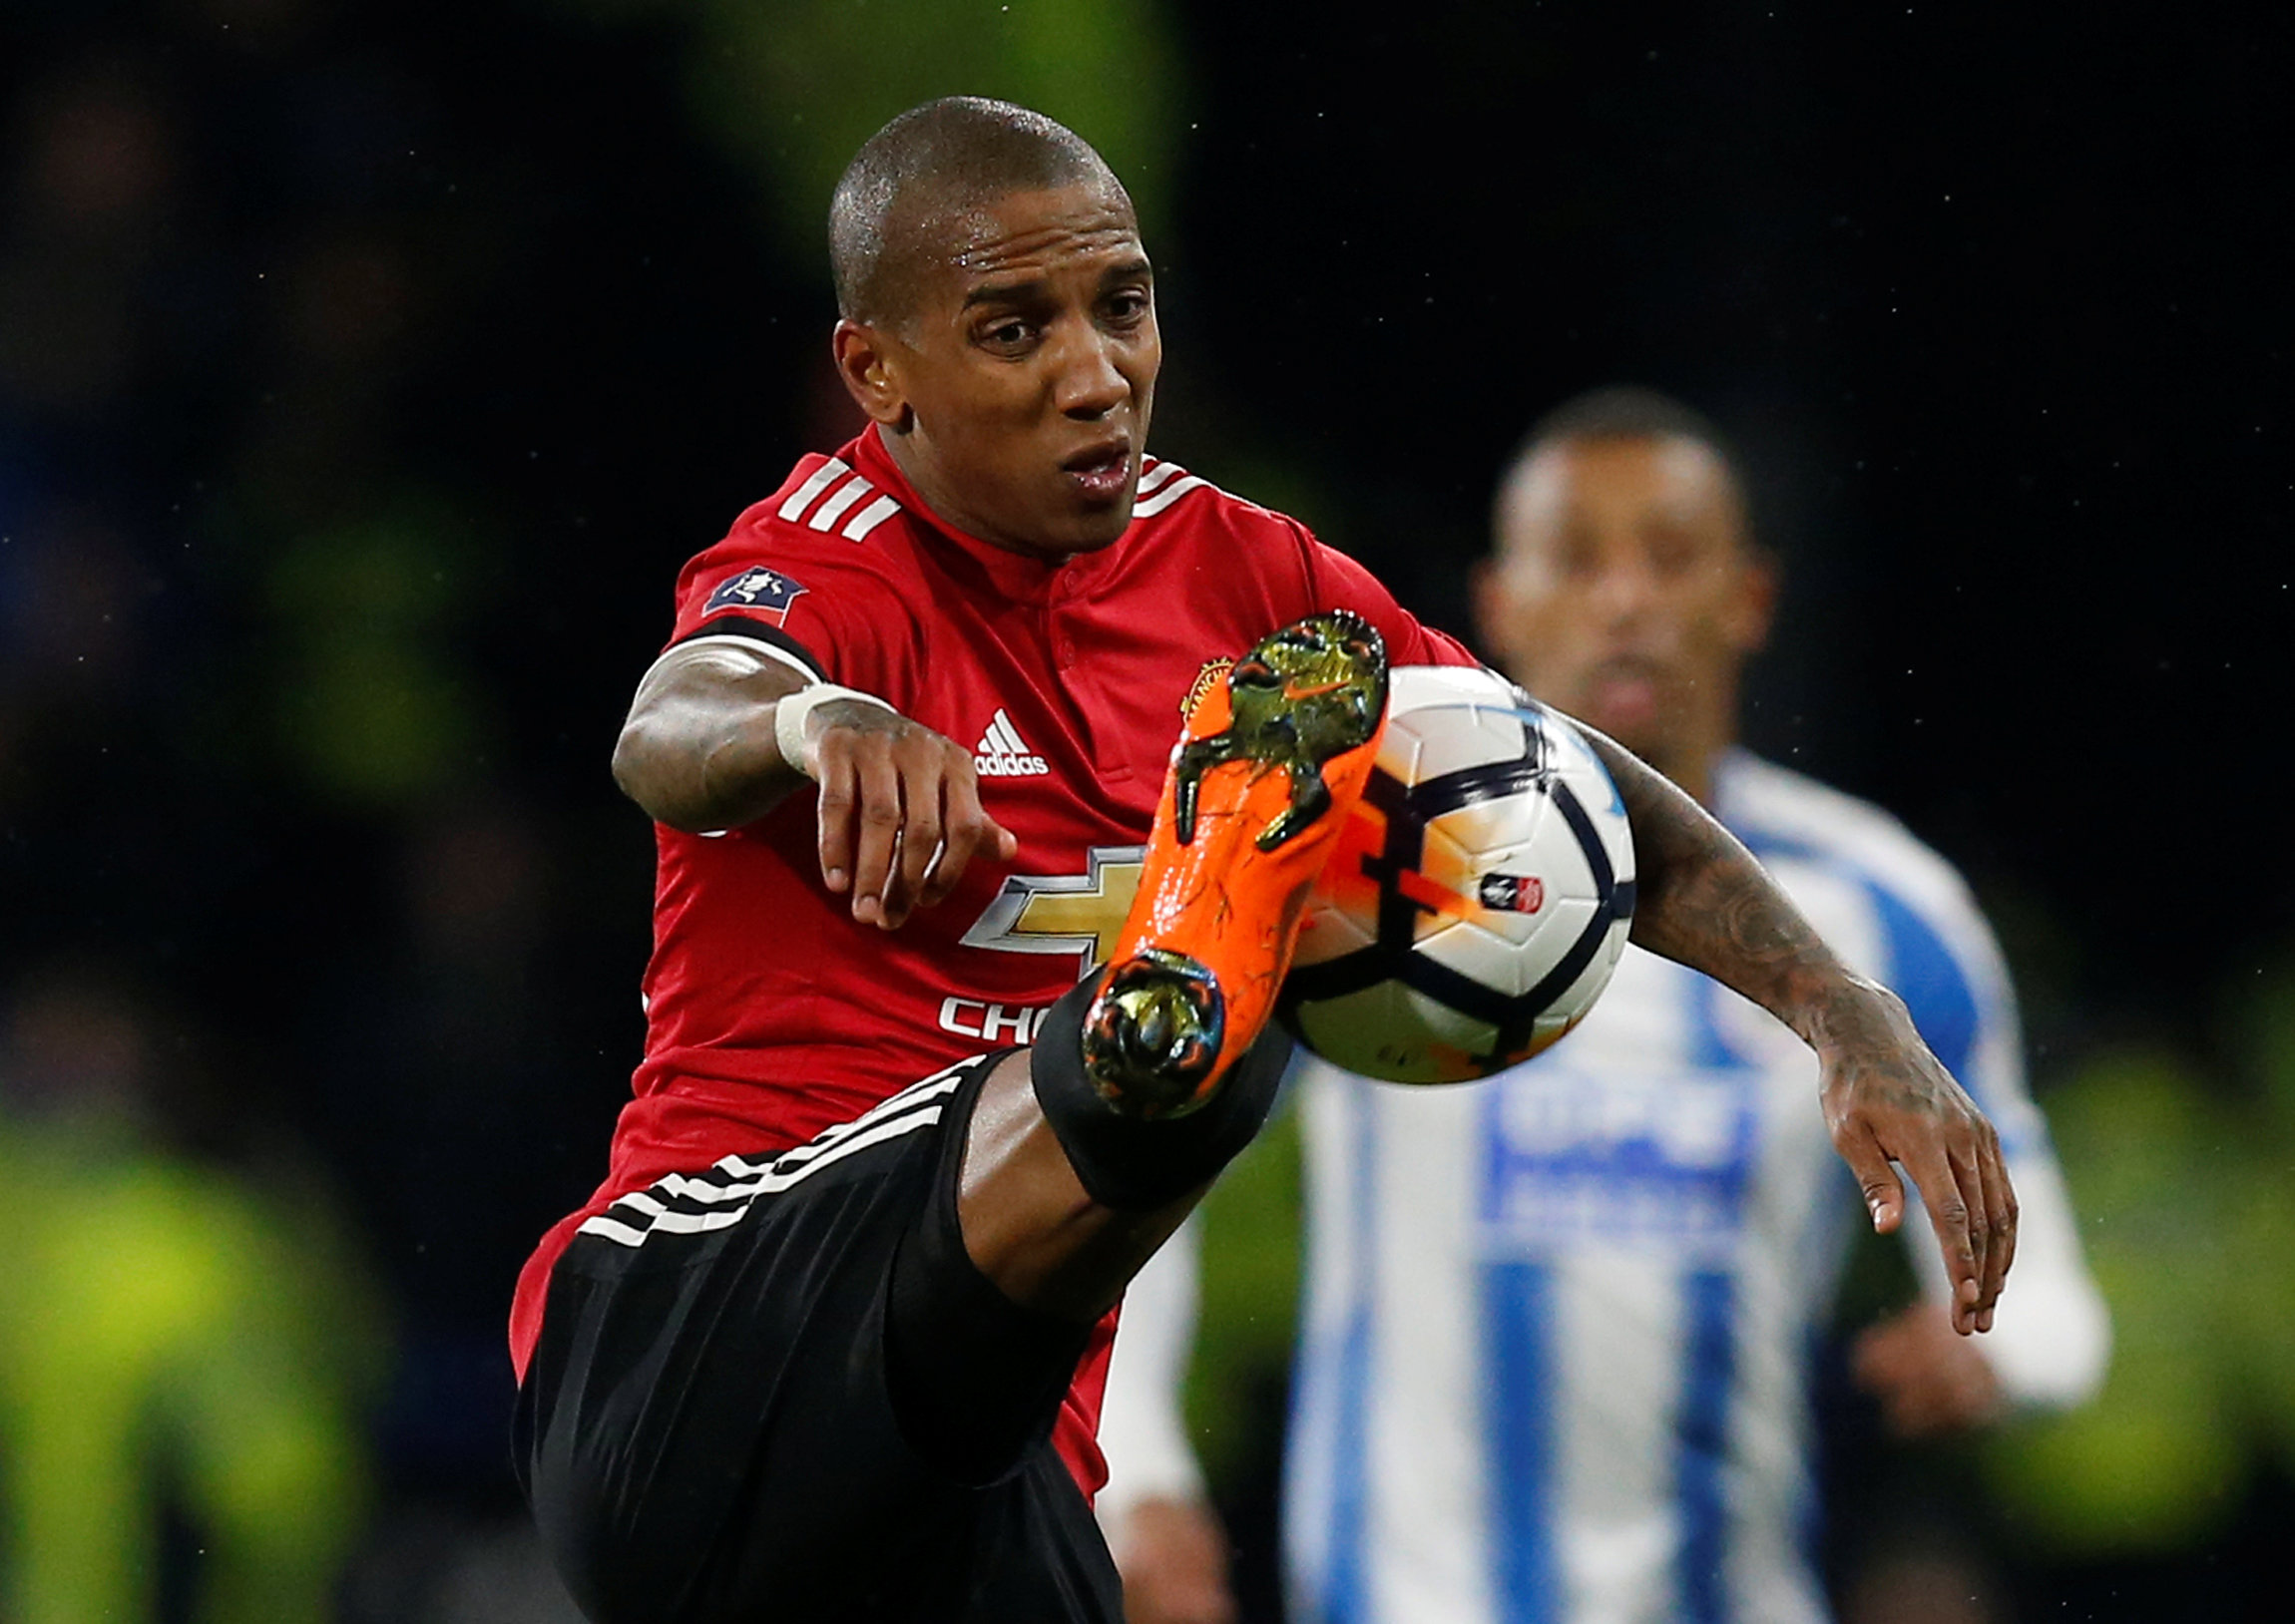 Soccer Football - FA Cup Fifth Round - Huddersfield Town vs Manchester United - John Smithu2019s Stadium, Huddersfield, Britain - February 17, 2018   Manchester United's Ashley Young in action   REUTERS/Andrew Yates